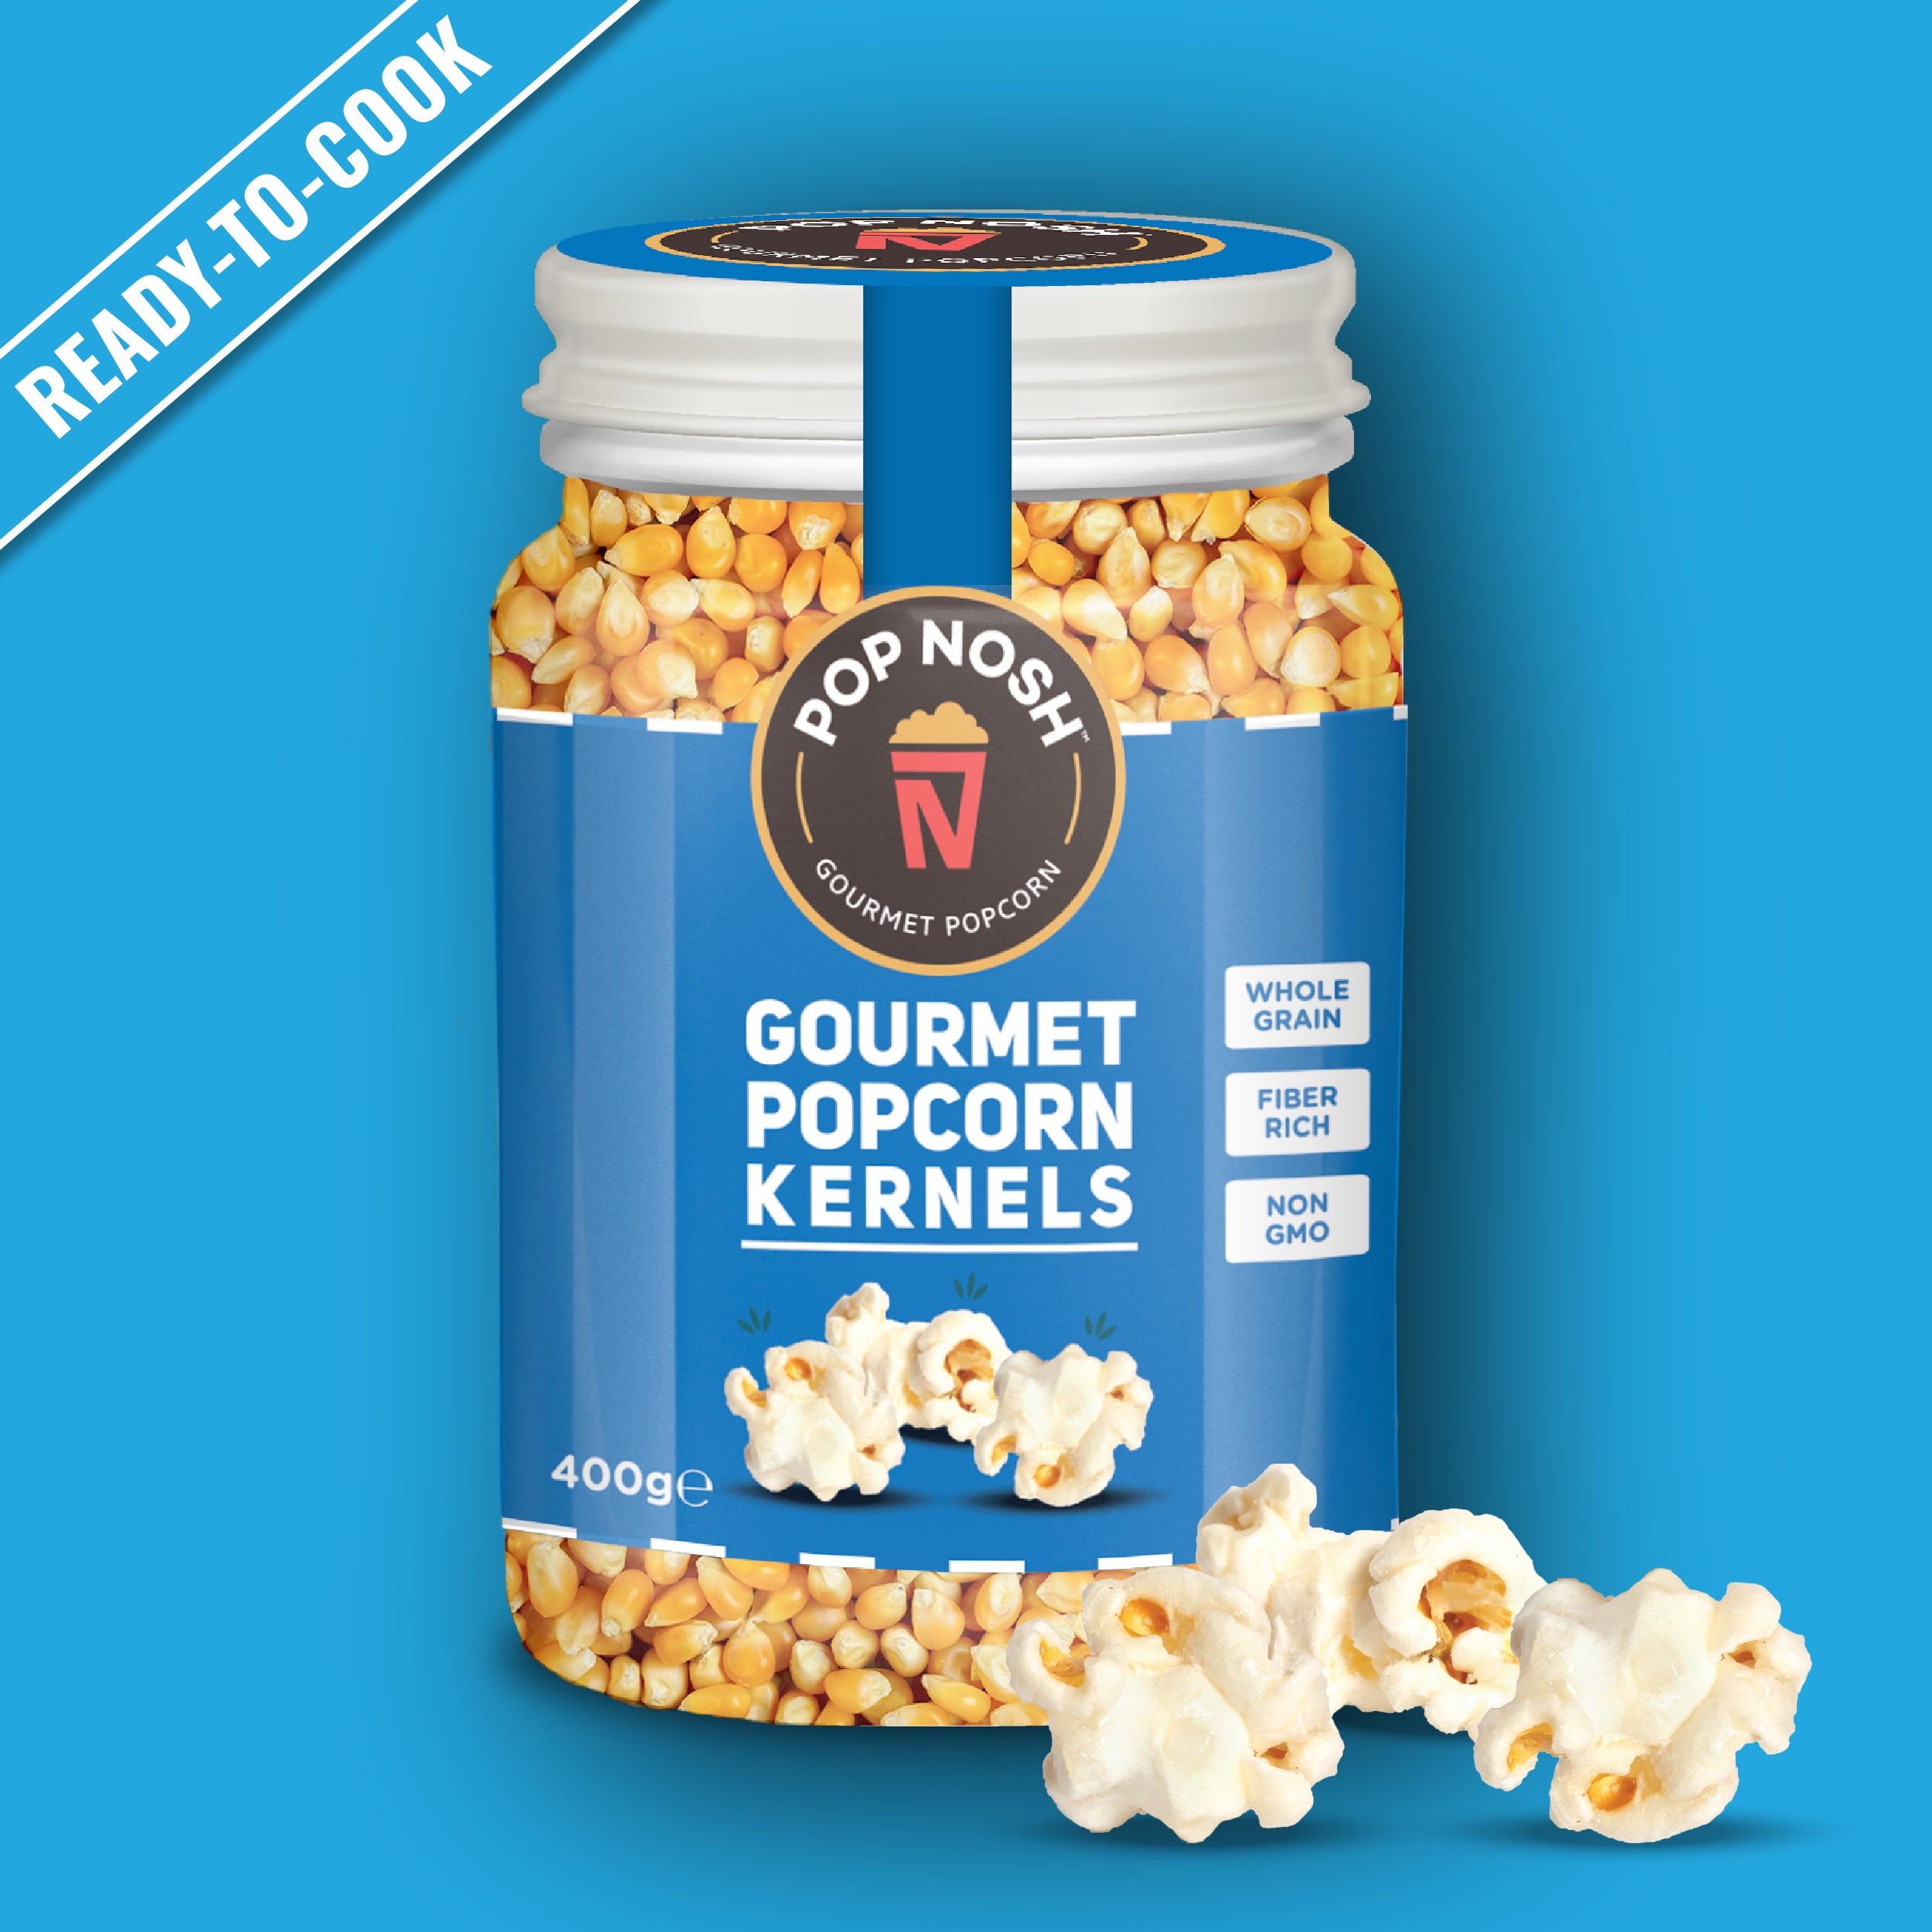 Gourmet Popcorn Kernels (Ready-To-Cook Corn) | Pack of 4 Jars